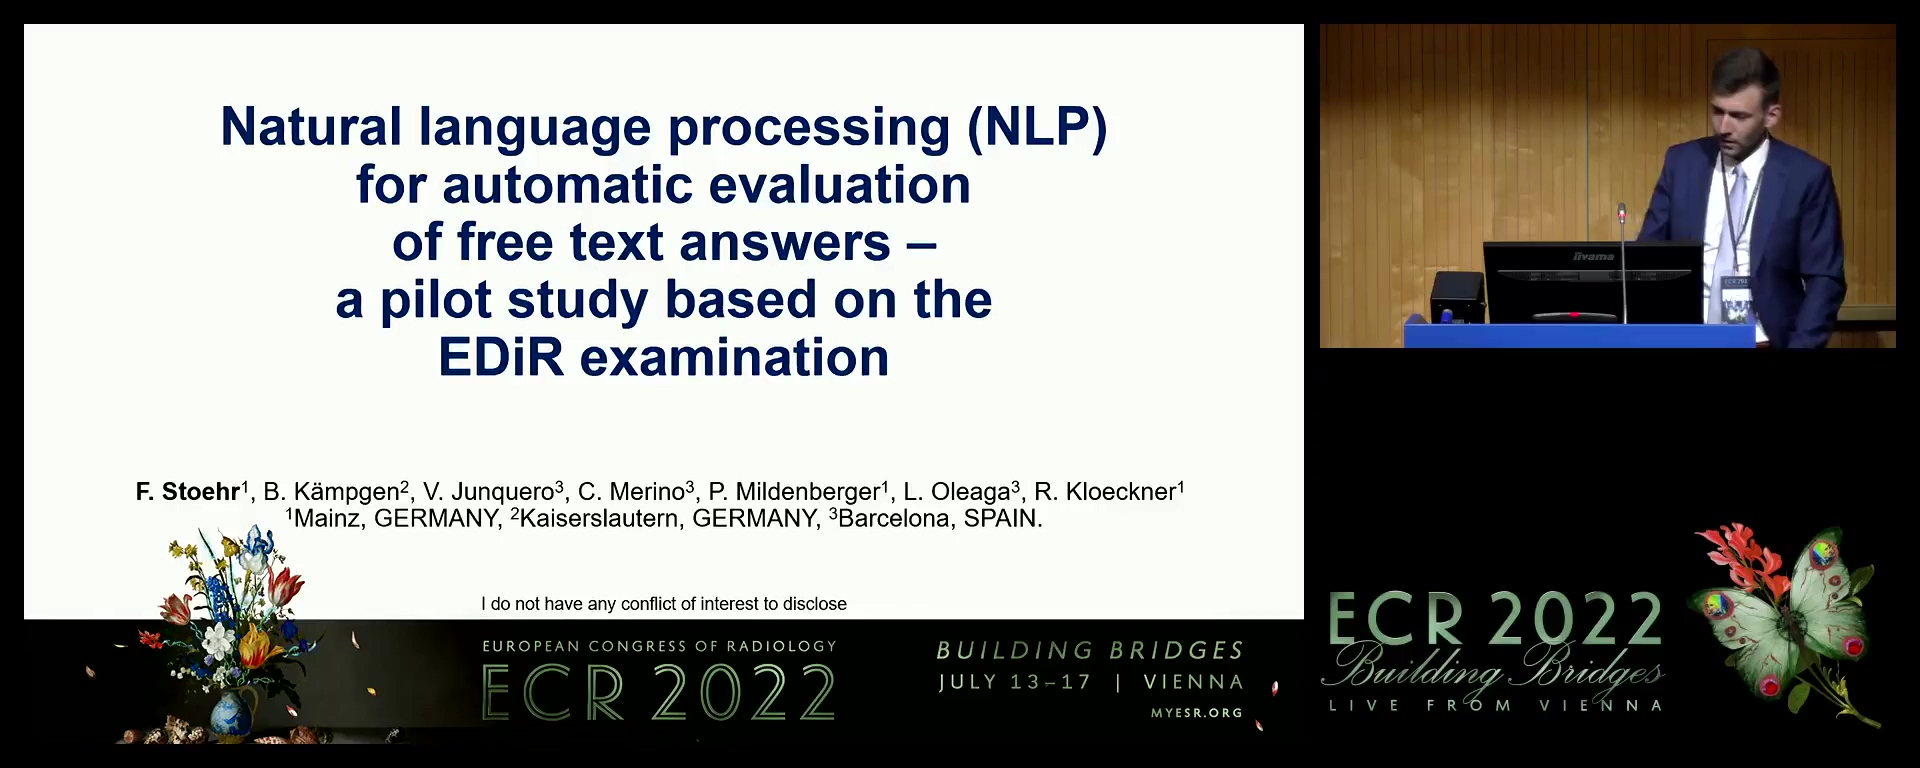 Natural language processing for automatic evaluation of free text answers: a pilot study based on the EDIR examination